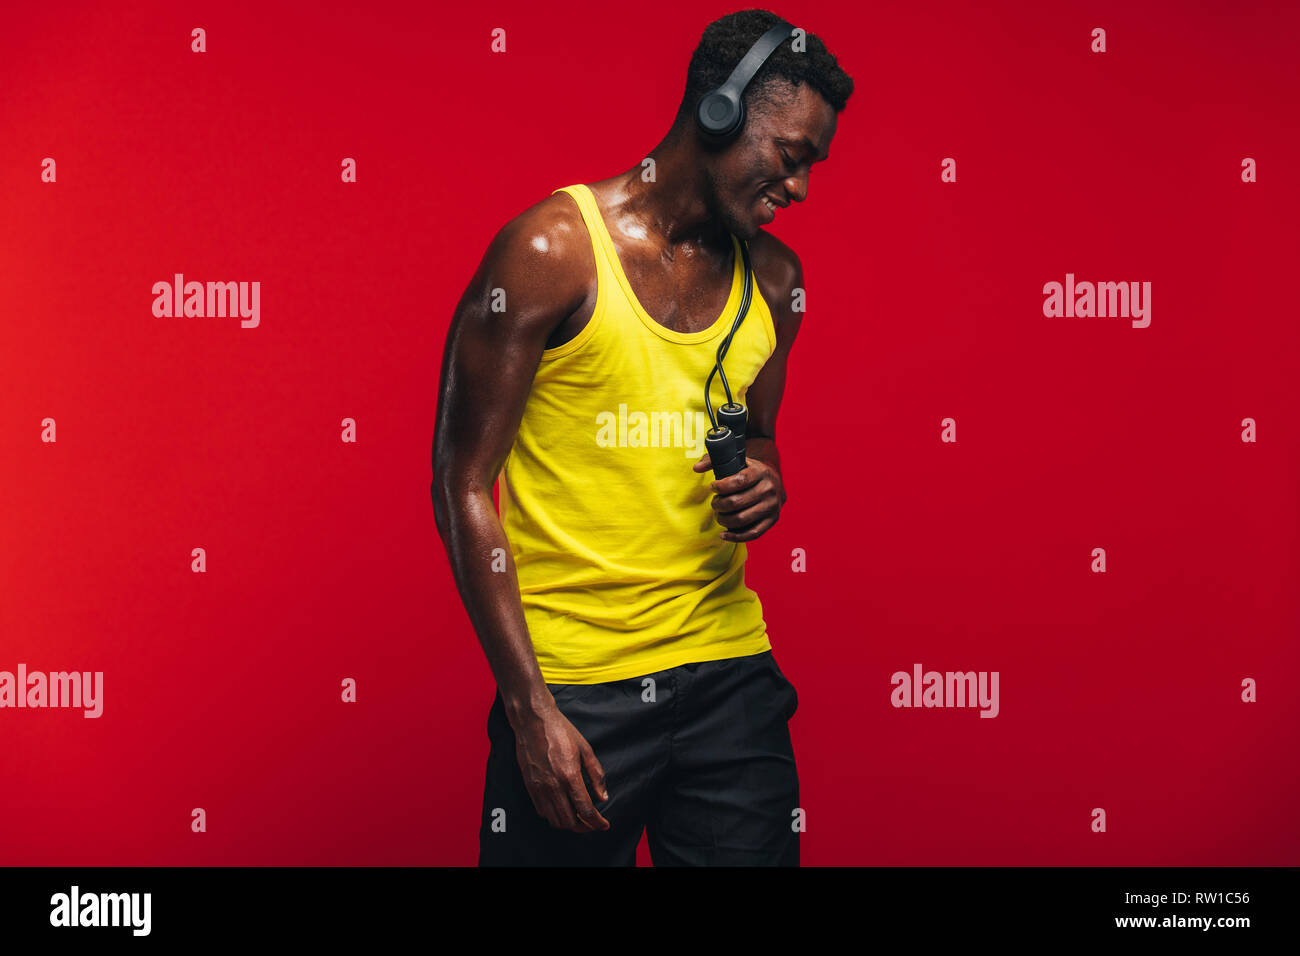 African muscular man with jumping rope listening to music on headphones on red background. Fit young man relaxing after workout. Stock Photo